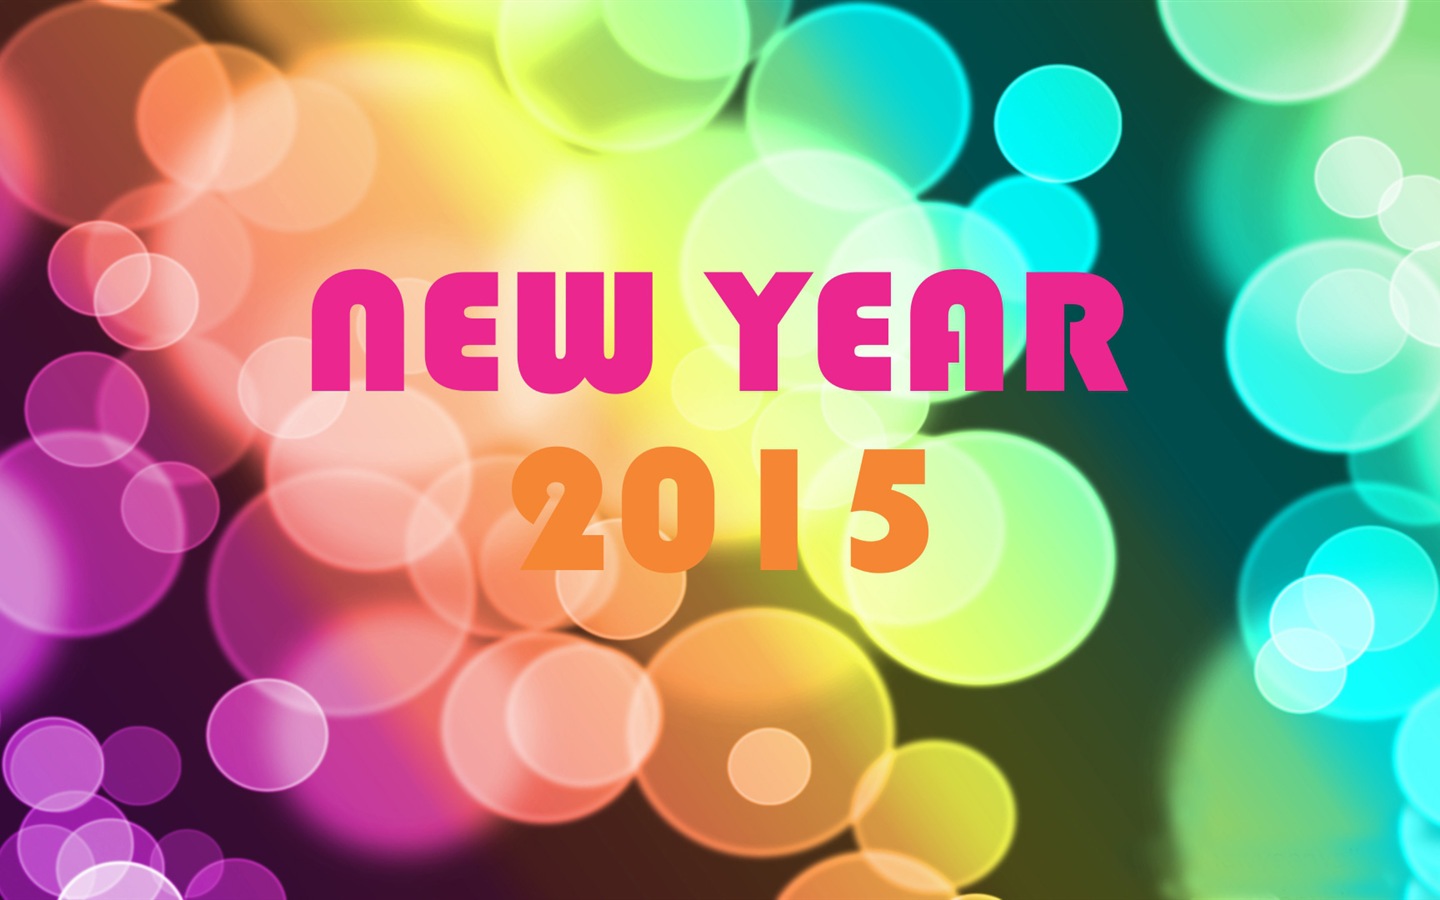 2015 New Year theme HD wallpapers (2) #18 - 1440x900